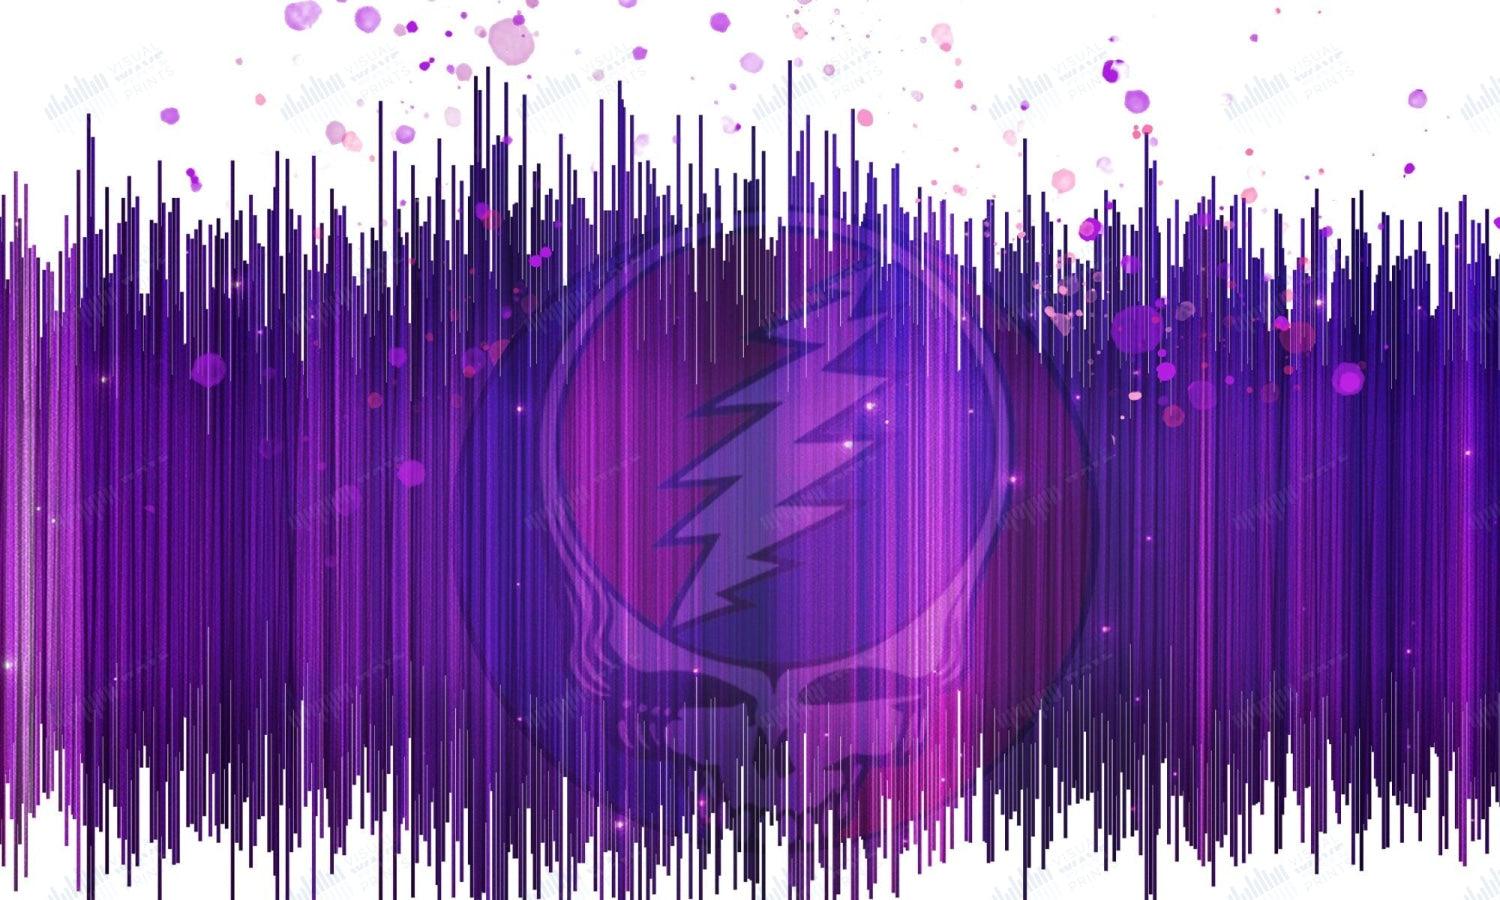 Touch of Grey by the Grateful Dead